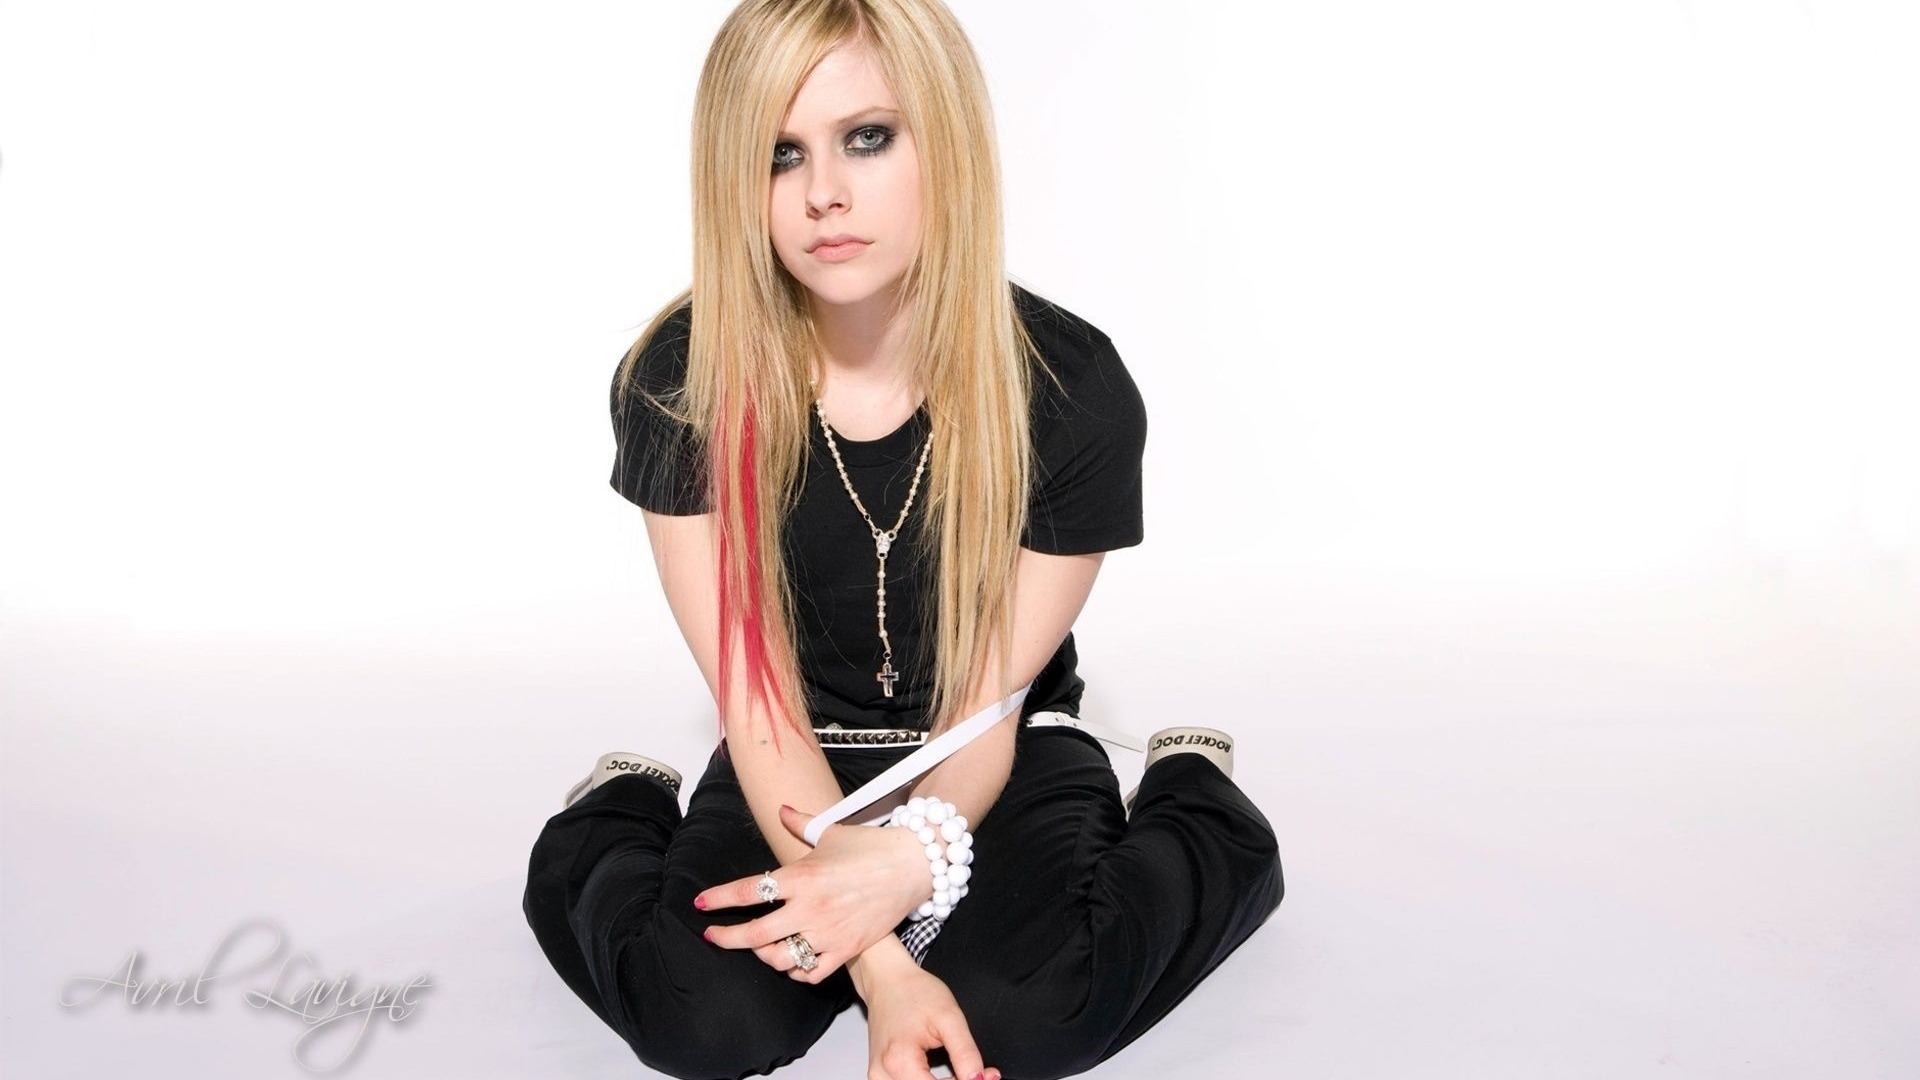 Avril Lavigne #063 - 1920x1080 Wallpapers Pictures Photos Images